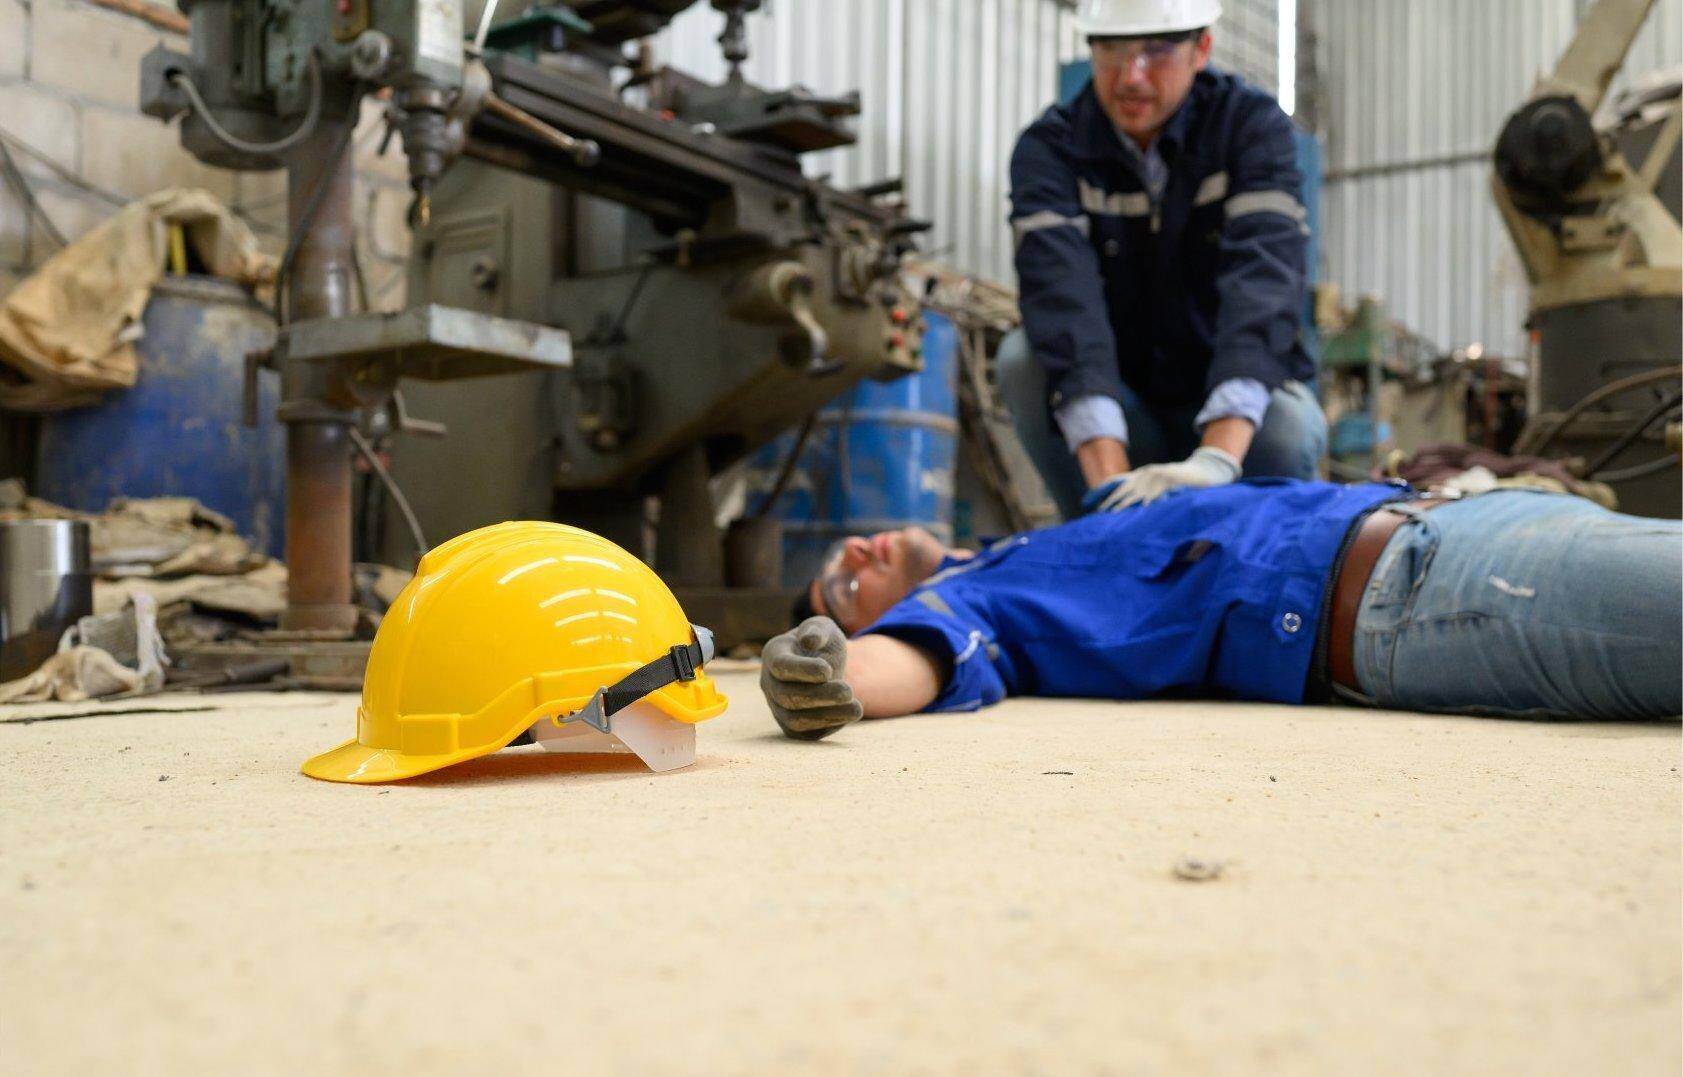 An unconscious man who has been injured on the job who will file for workers compensation in Griffin, Georgia